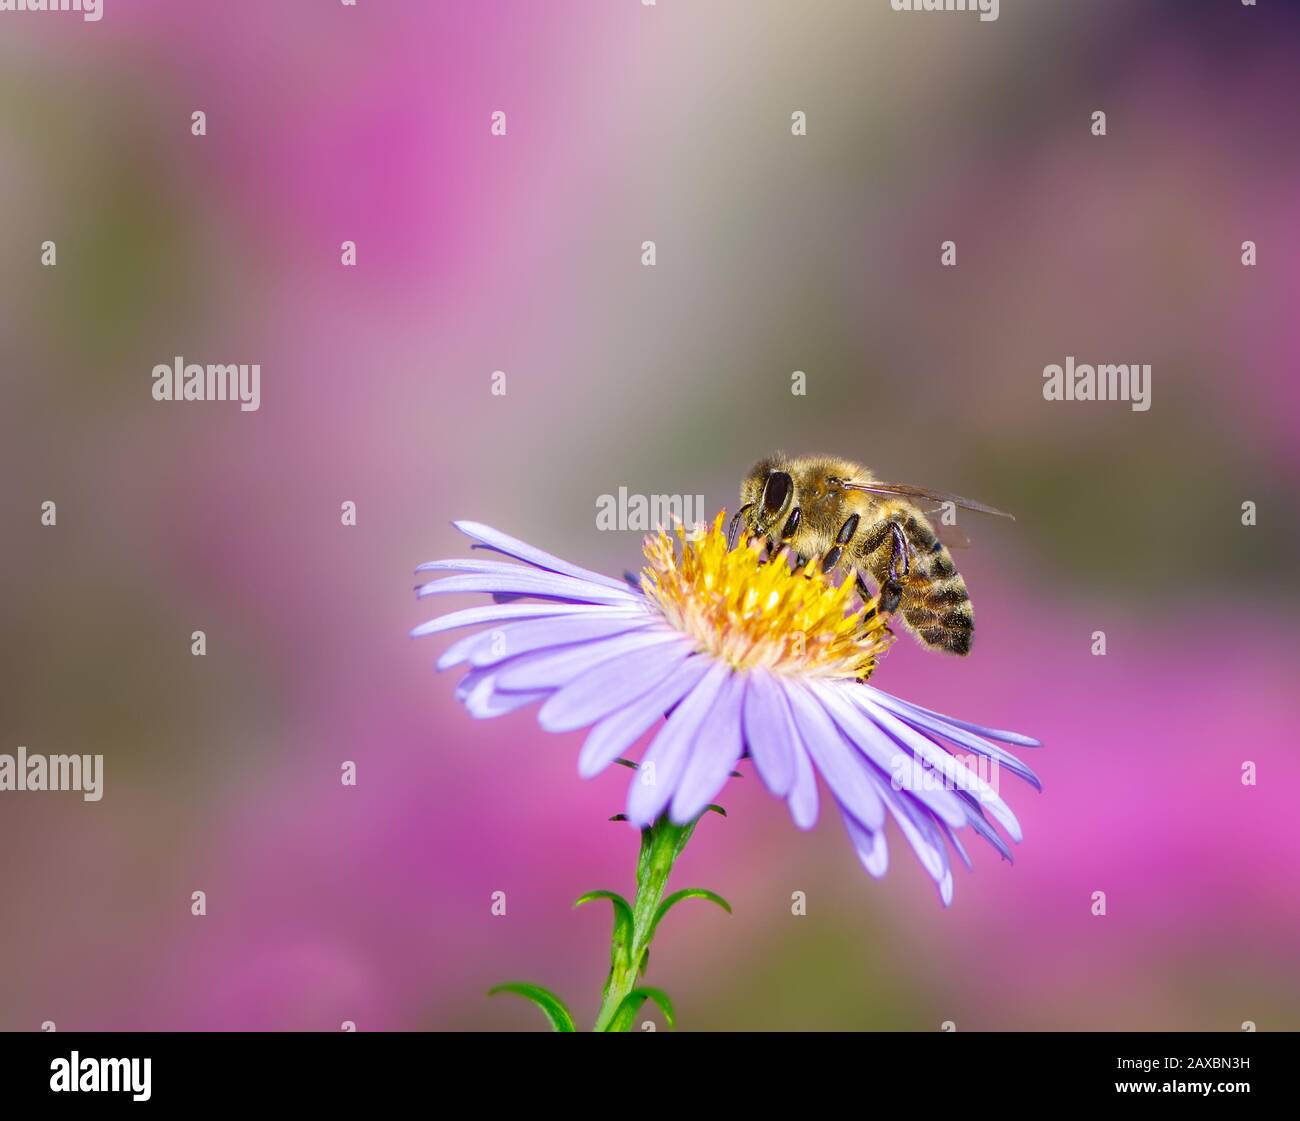 Honeybee collecting nectar on a purple aster flower. Stock Photo